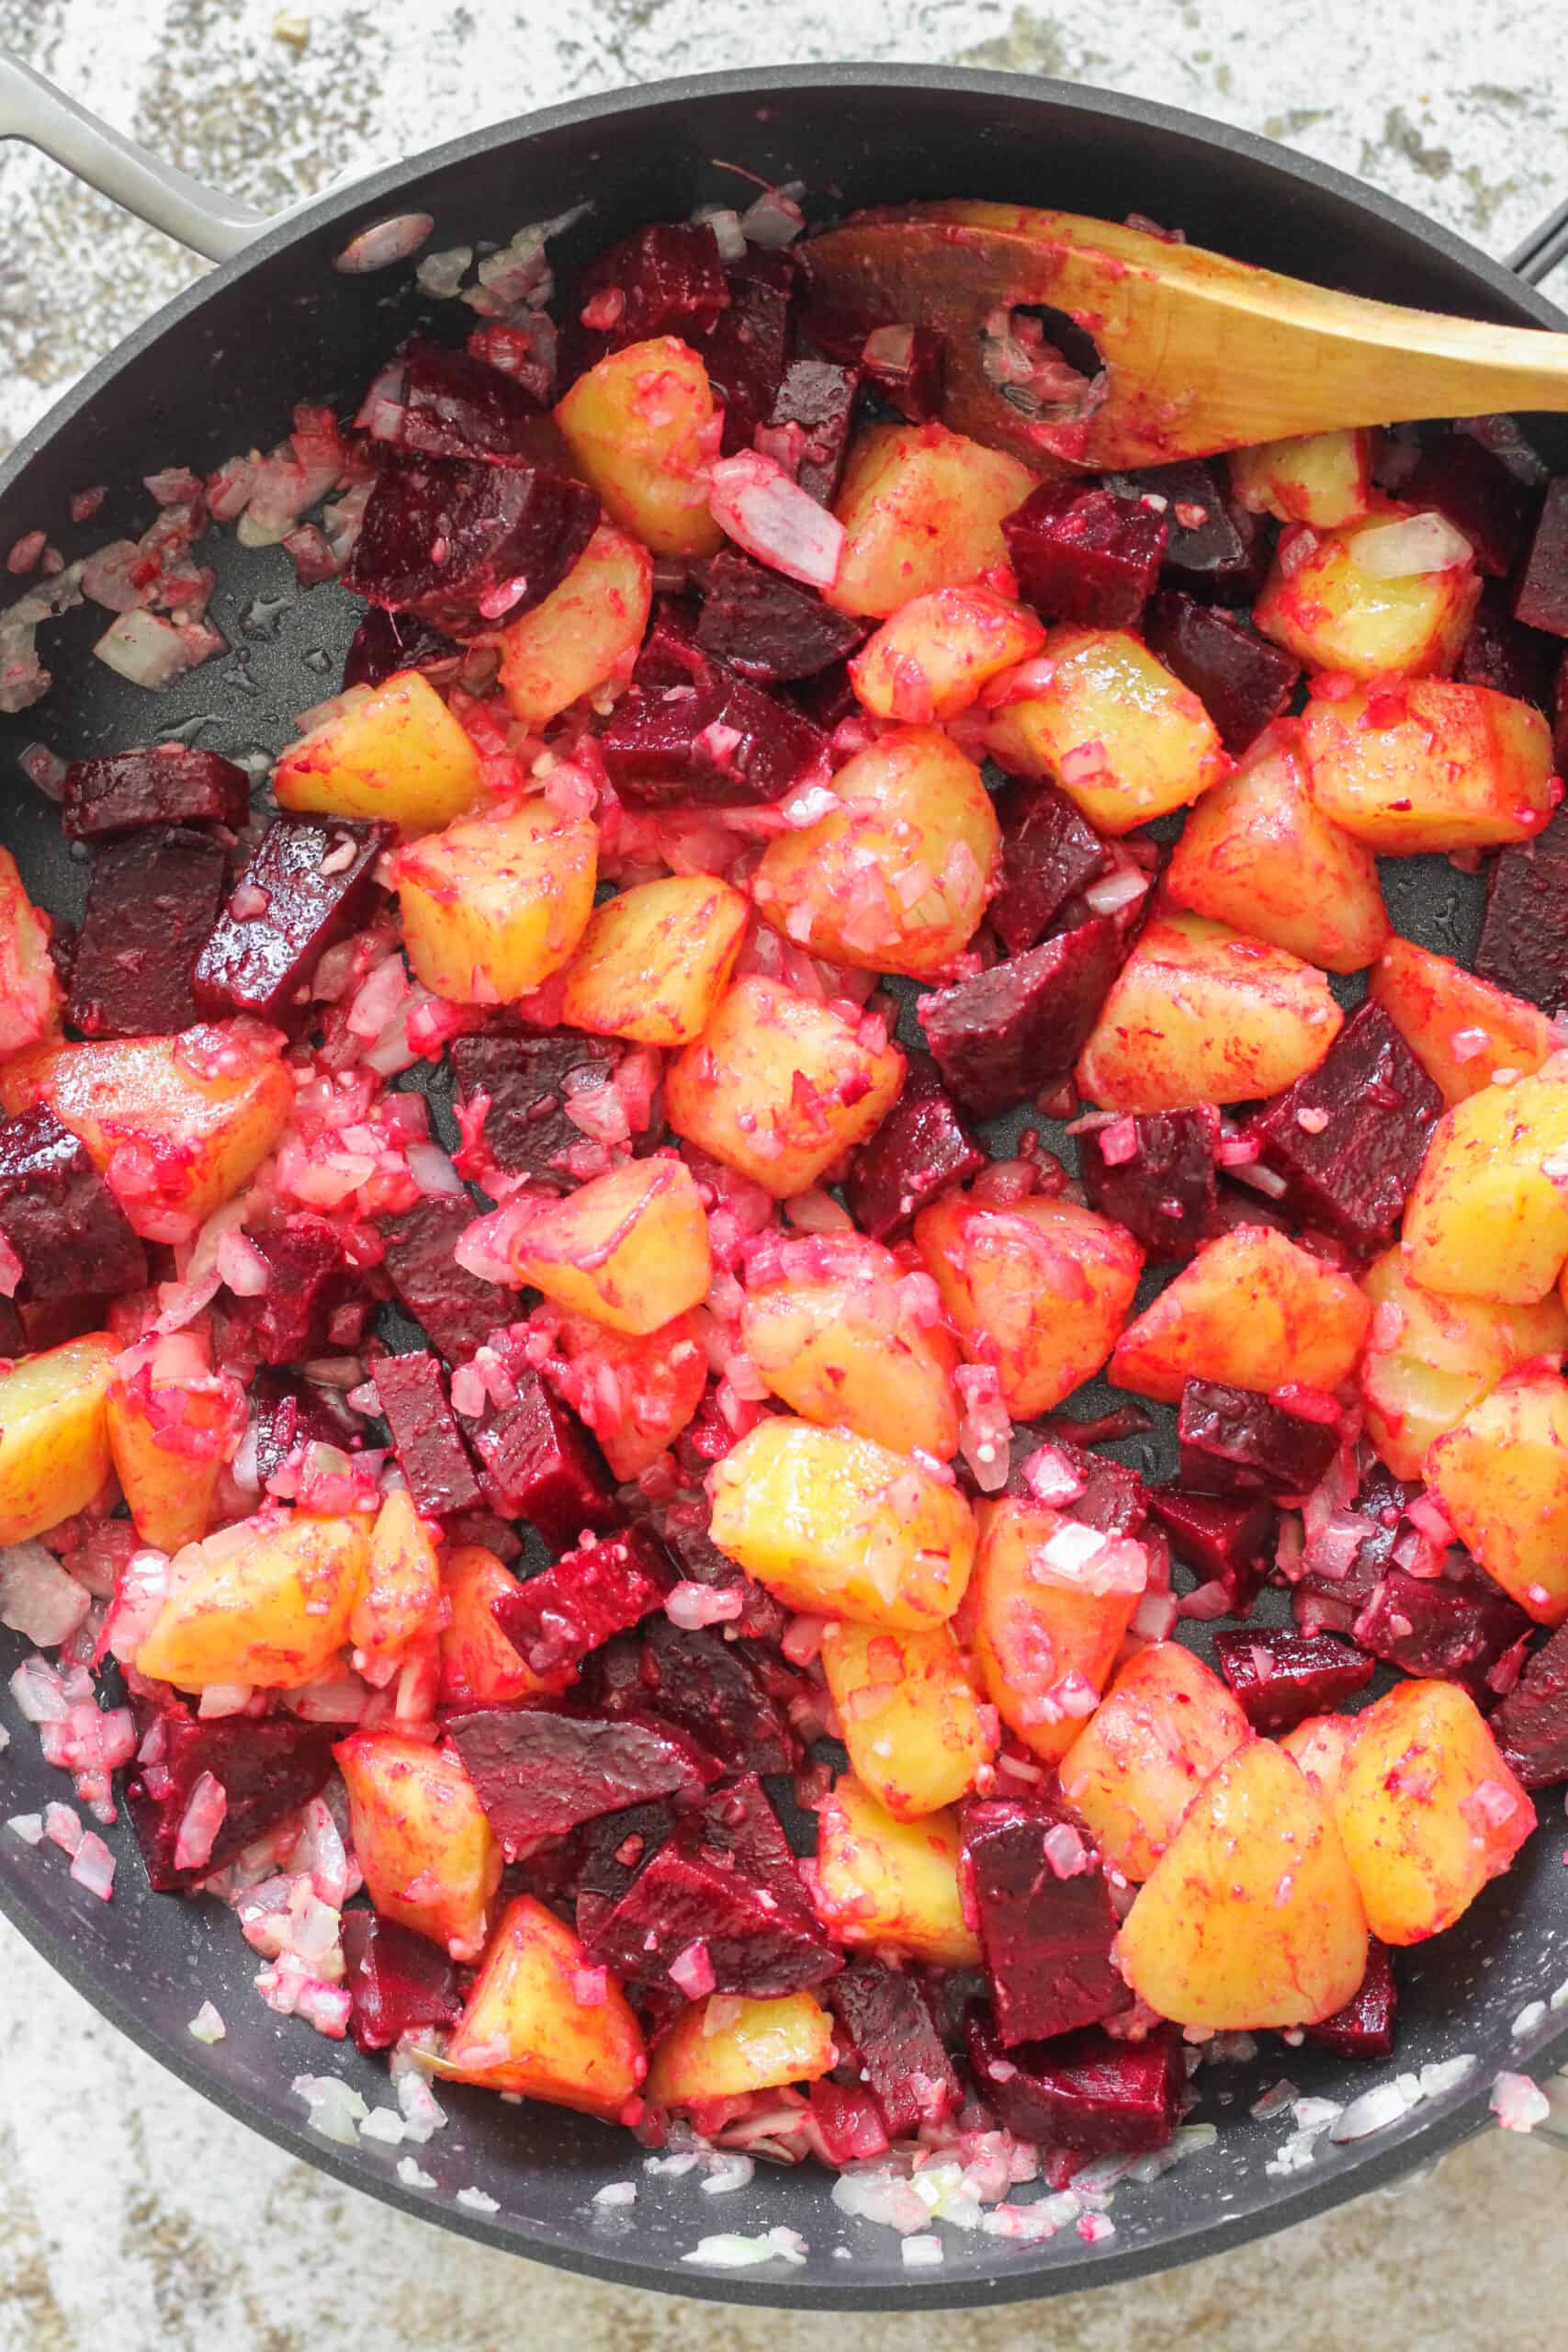 Beet and Potato salad in a large pan with a wooden spoon.